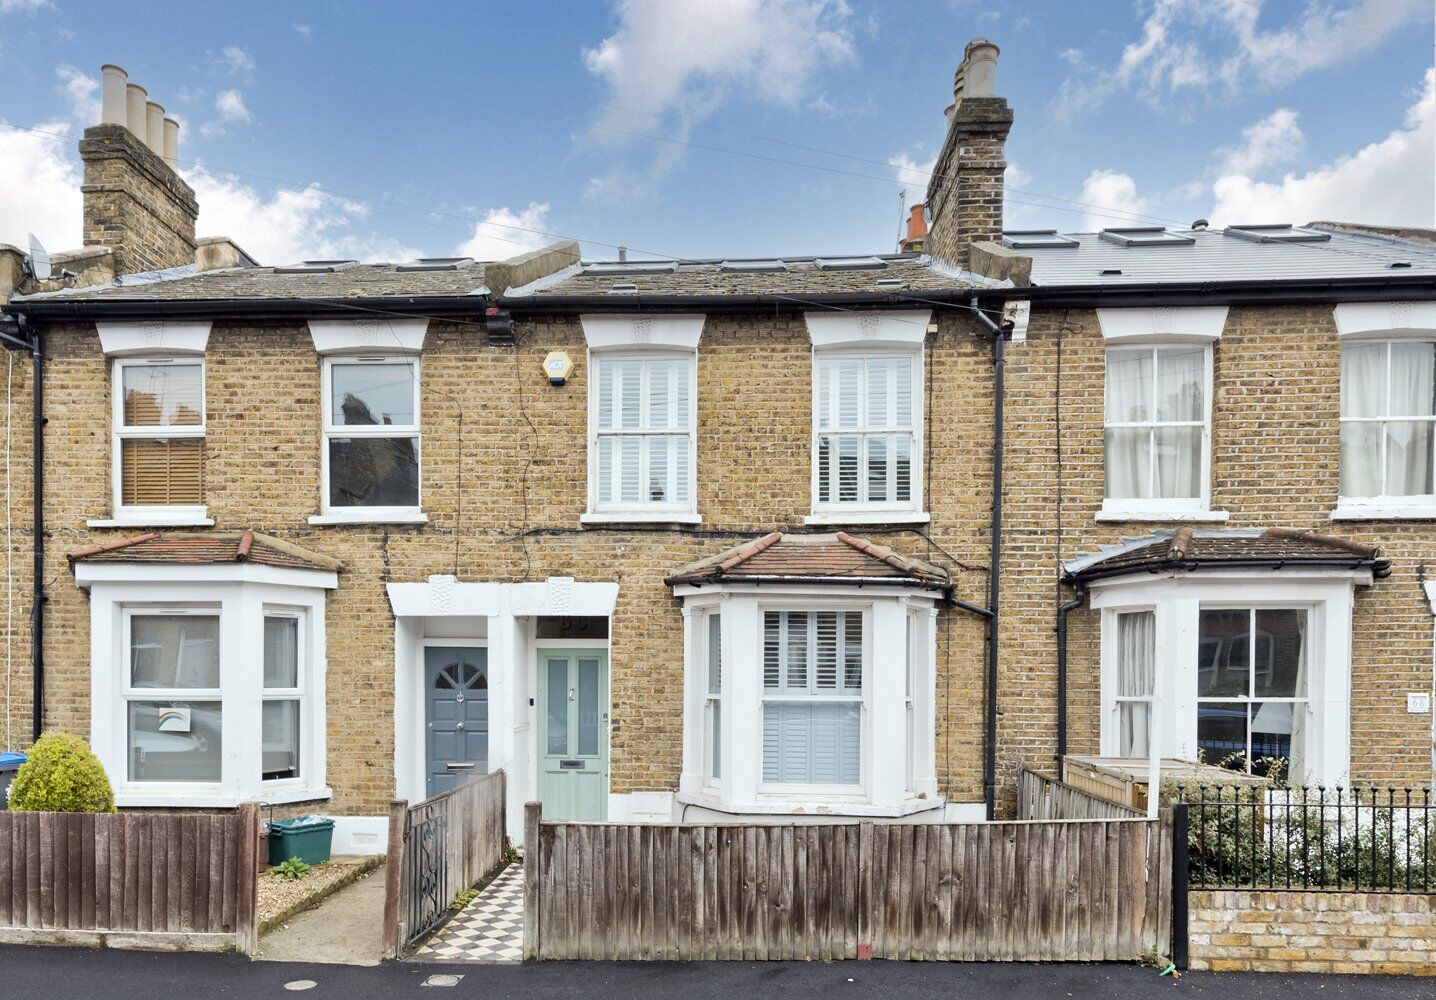 3 bedroom mid terraced house for sale Gladstone Road, Wimbledon, SW19, main image